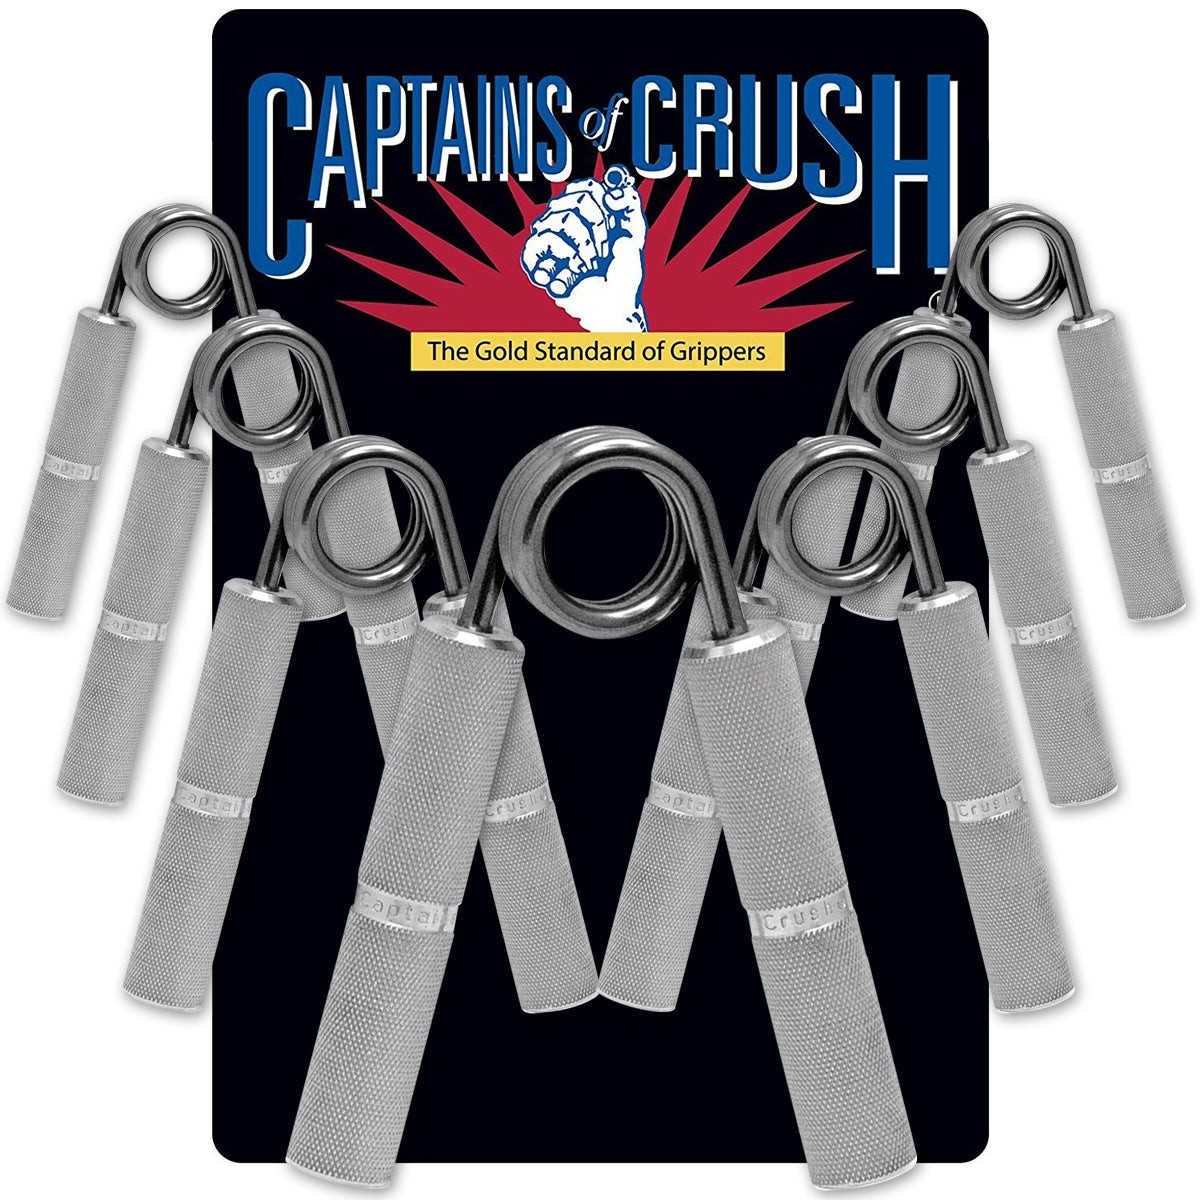 Captains of Crush Hand Grippers Captains of Crush